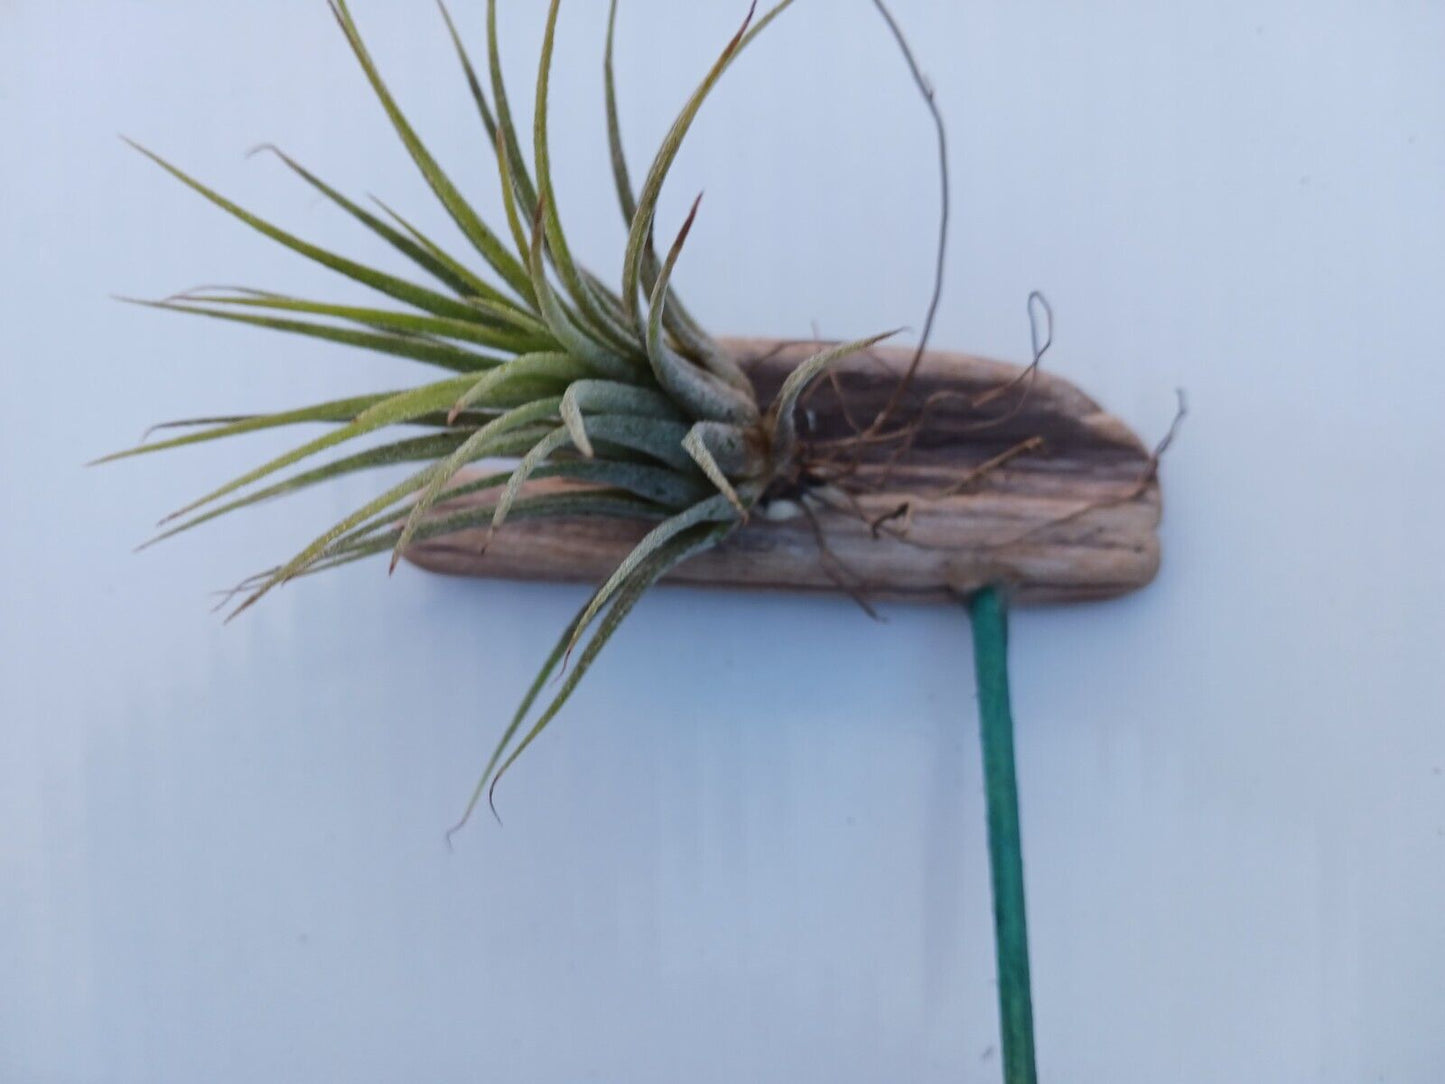 Bromeliad Tillandsia mounted on Driftwood for in terrarium Tropical Air Plant